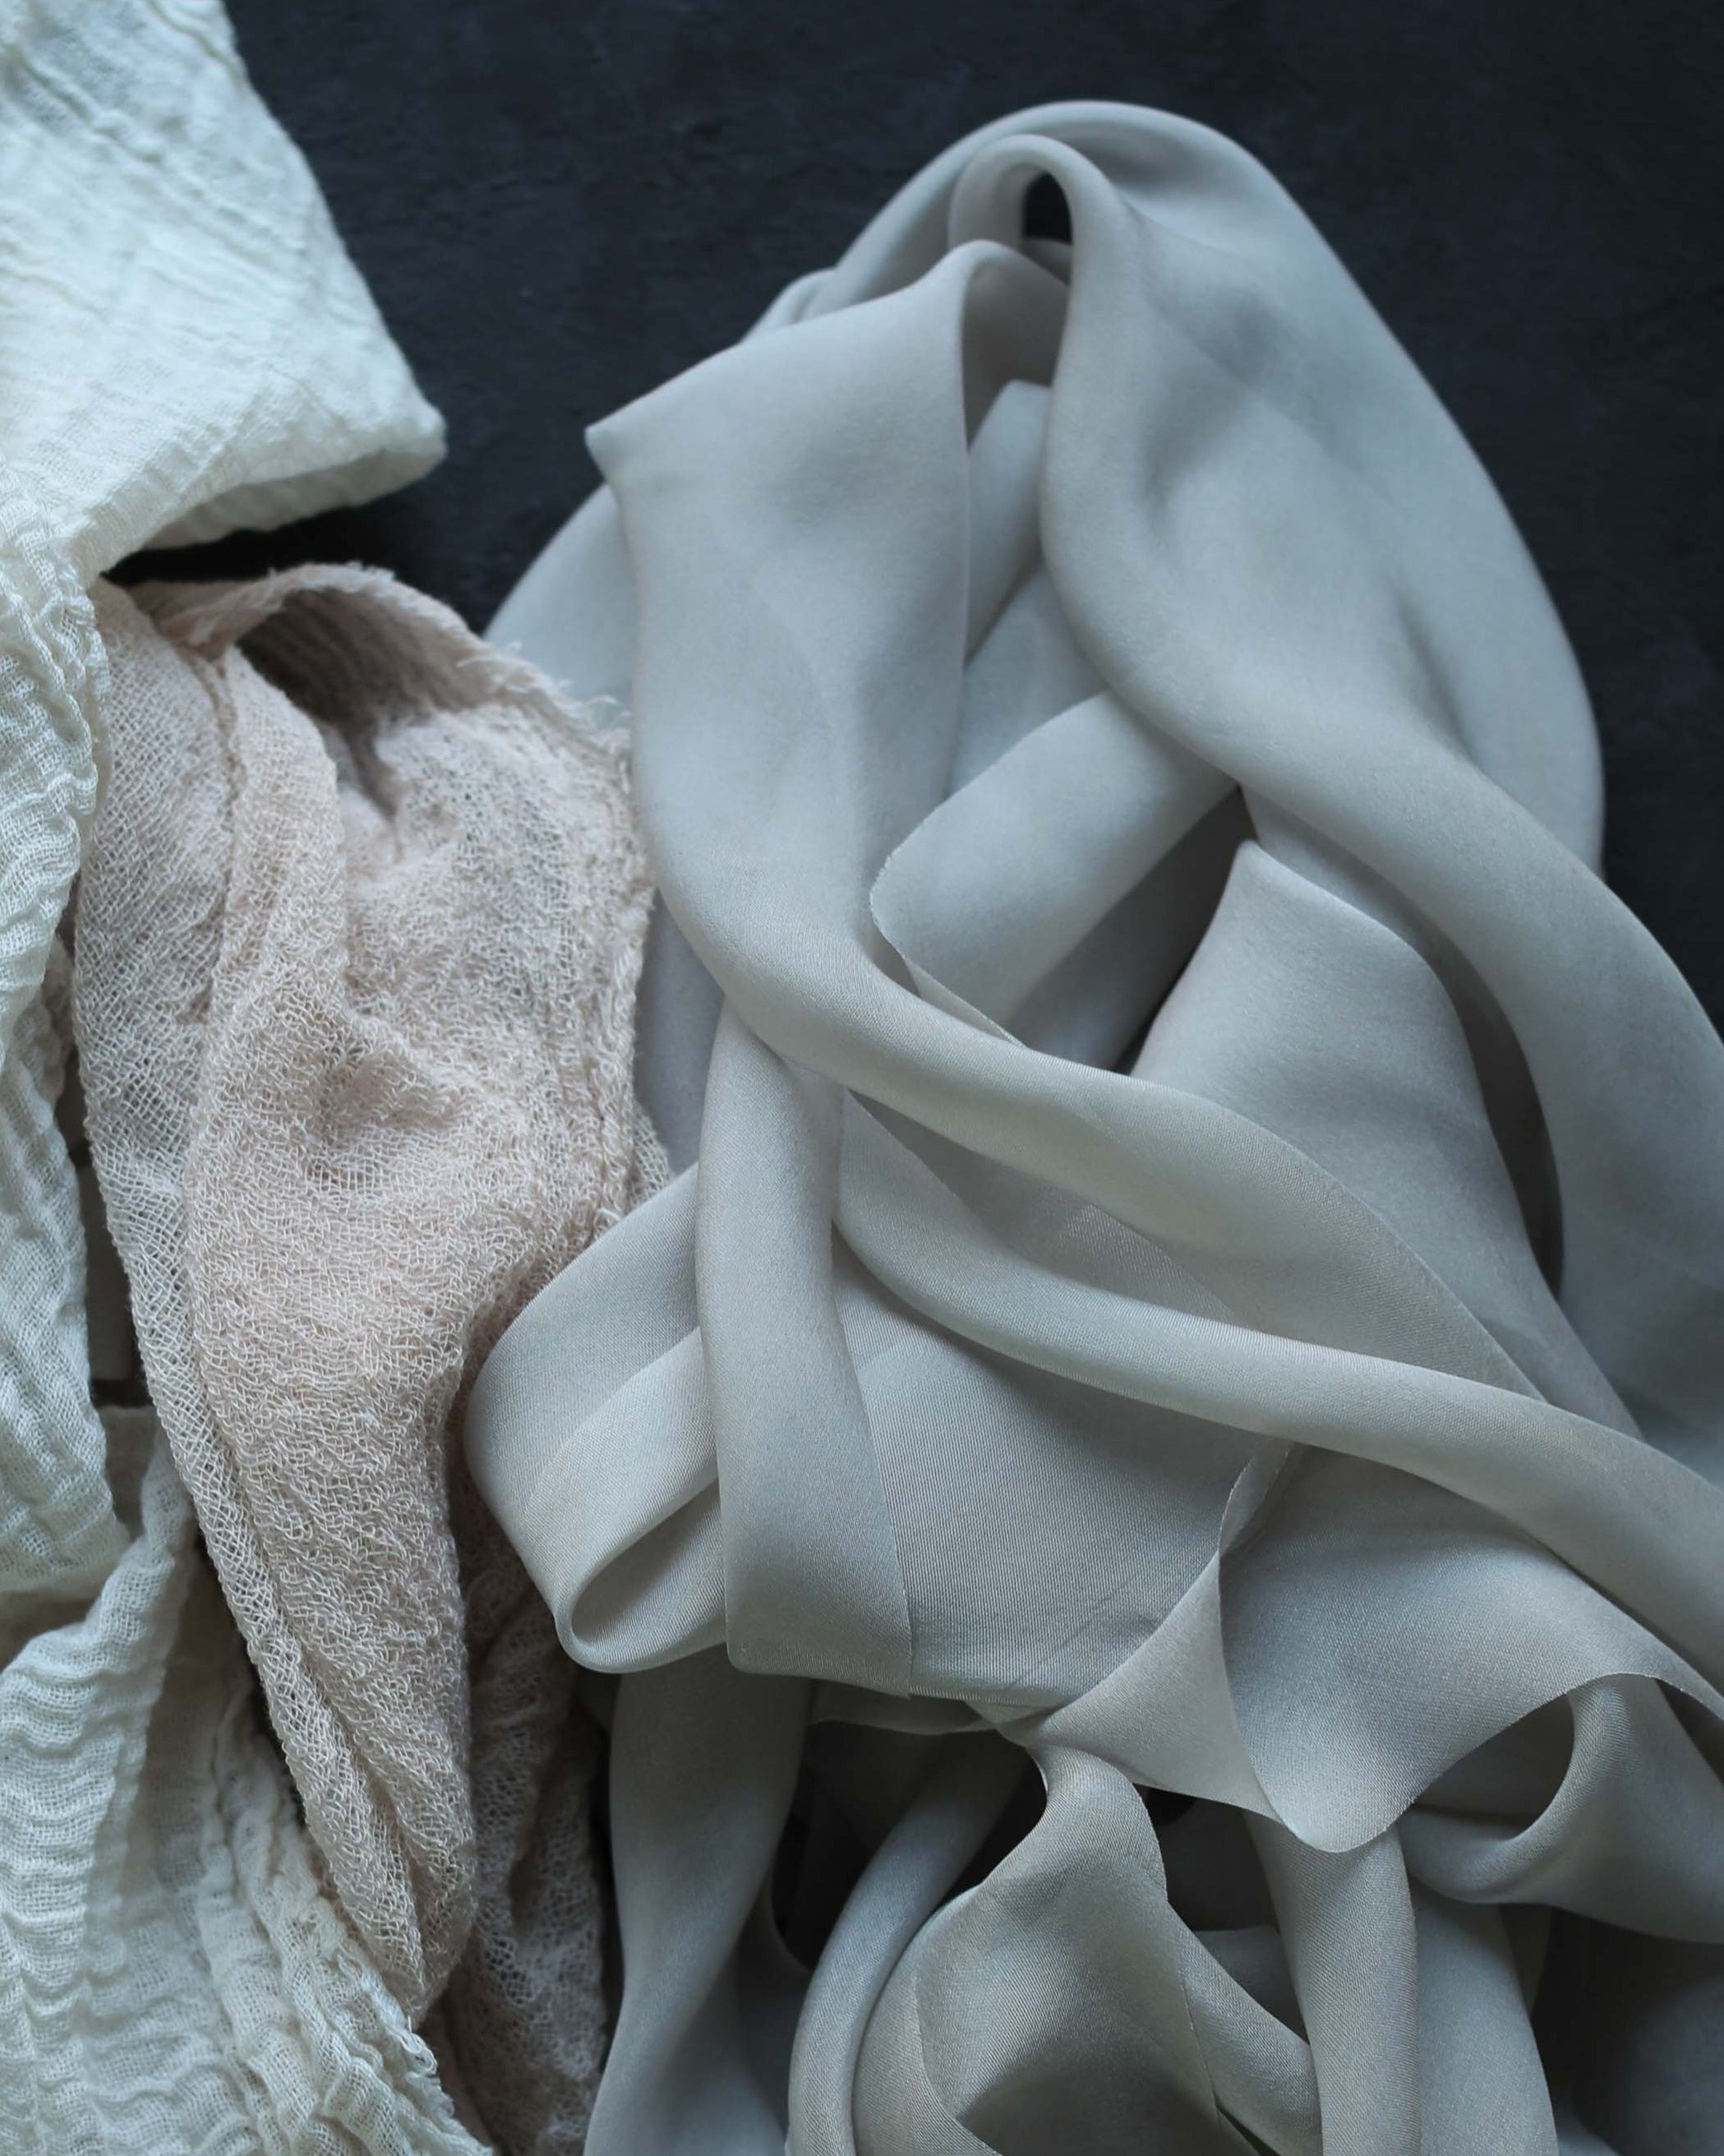 naturally dyed textiles. Cotton and silk